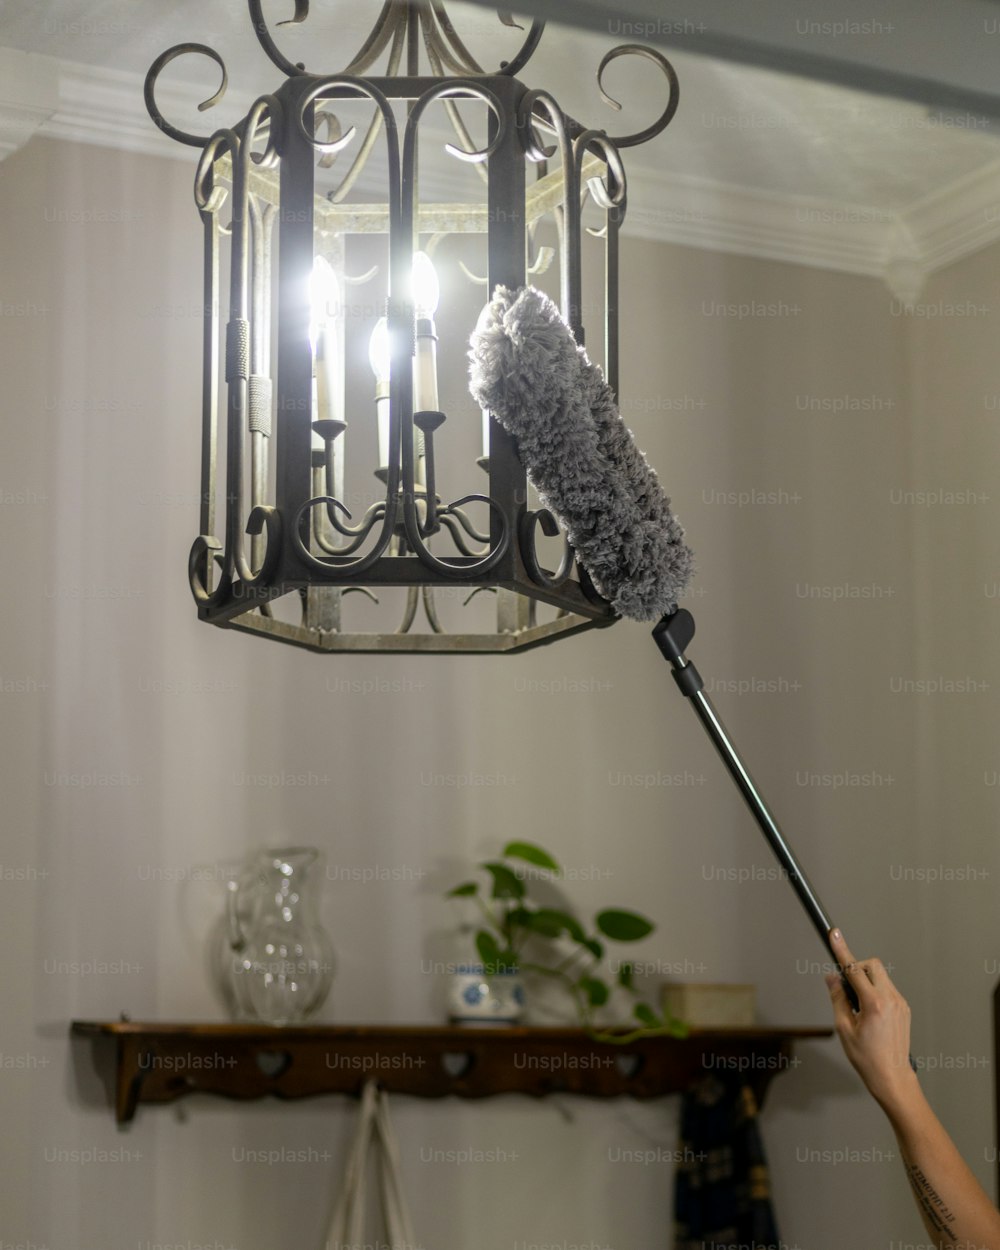 a person is holding a duster in front of a chandelier